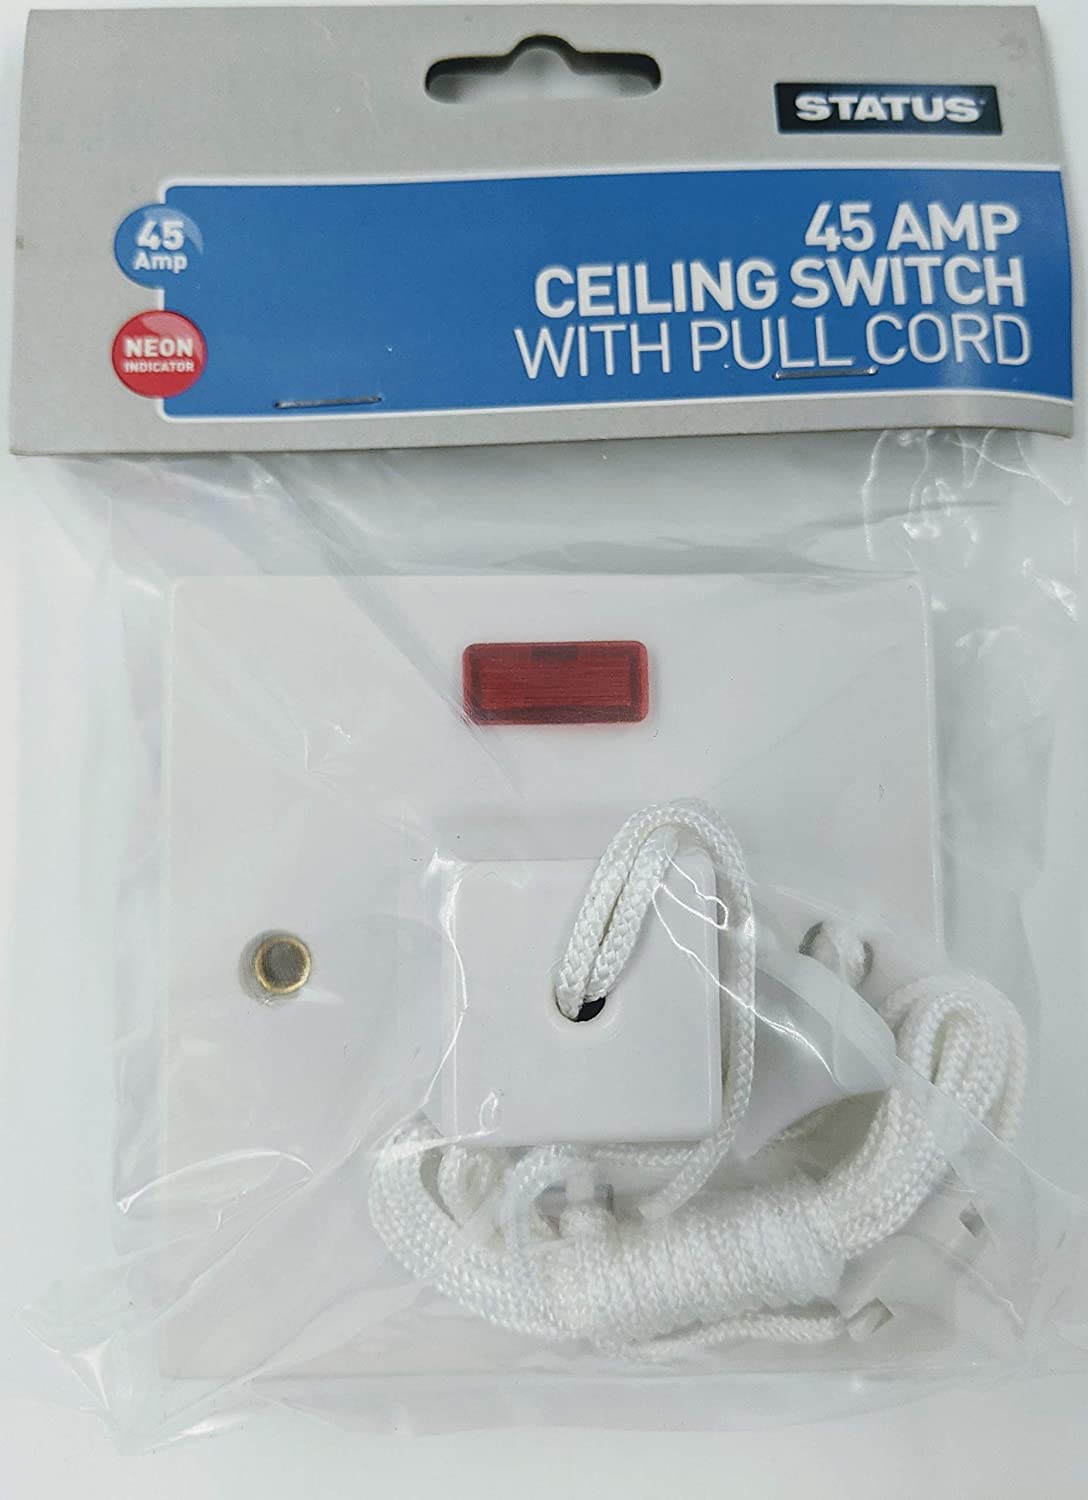 Electric Shower Ceiling Switch with Pull Cord 45 Amp Double Pole Isolator Isolation White Bathroom with Neon by Status